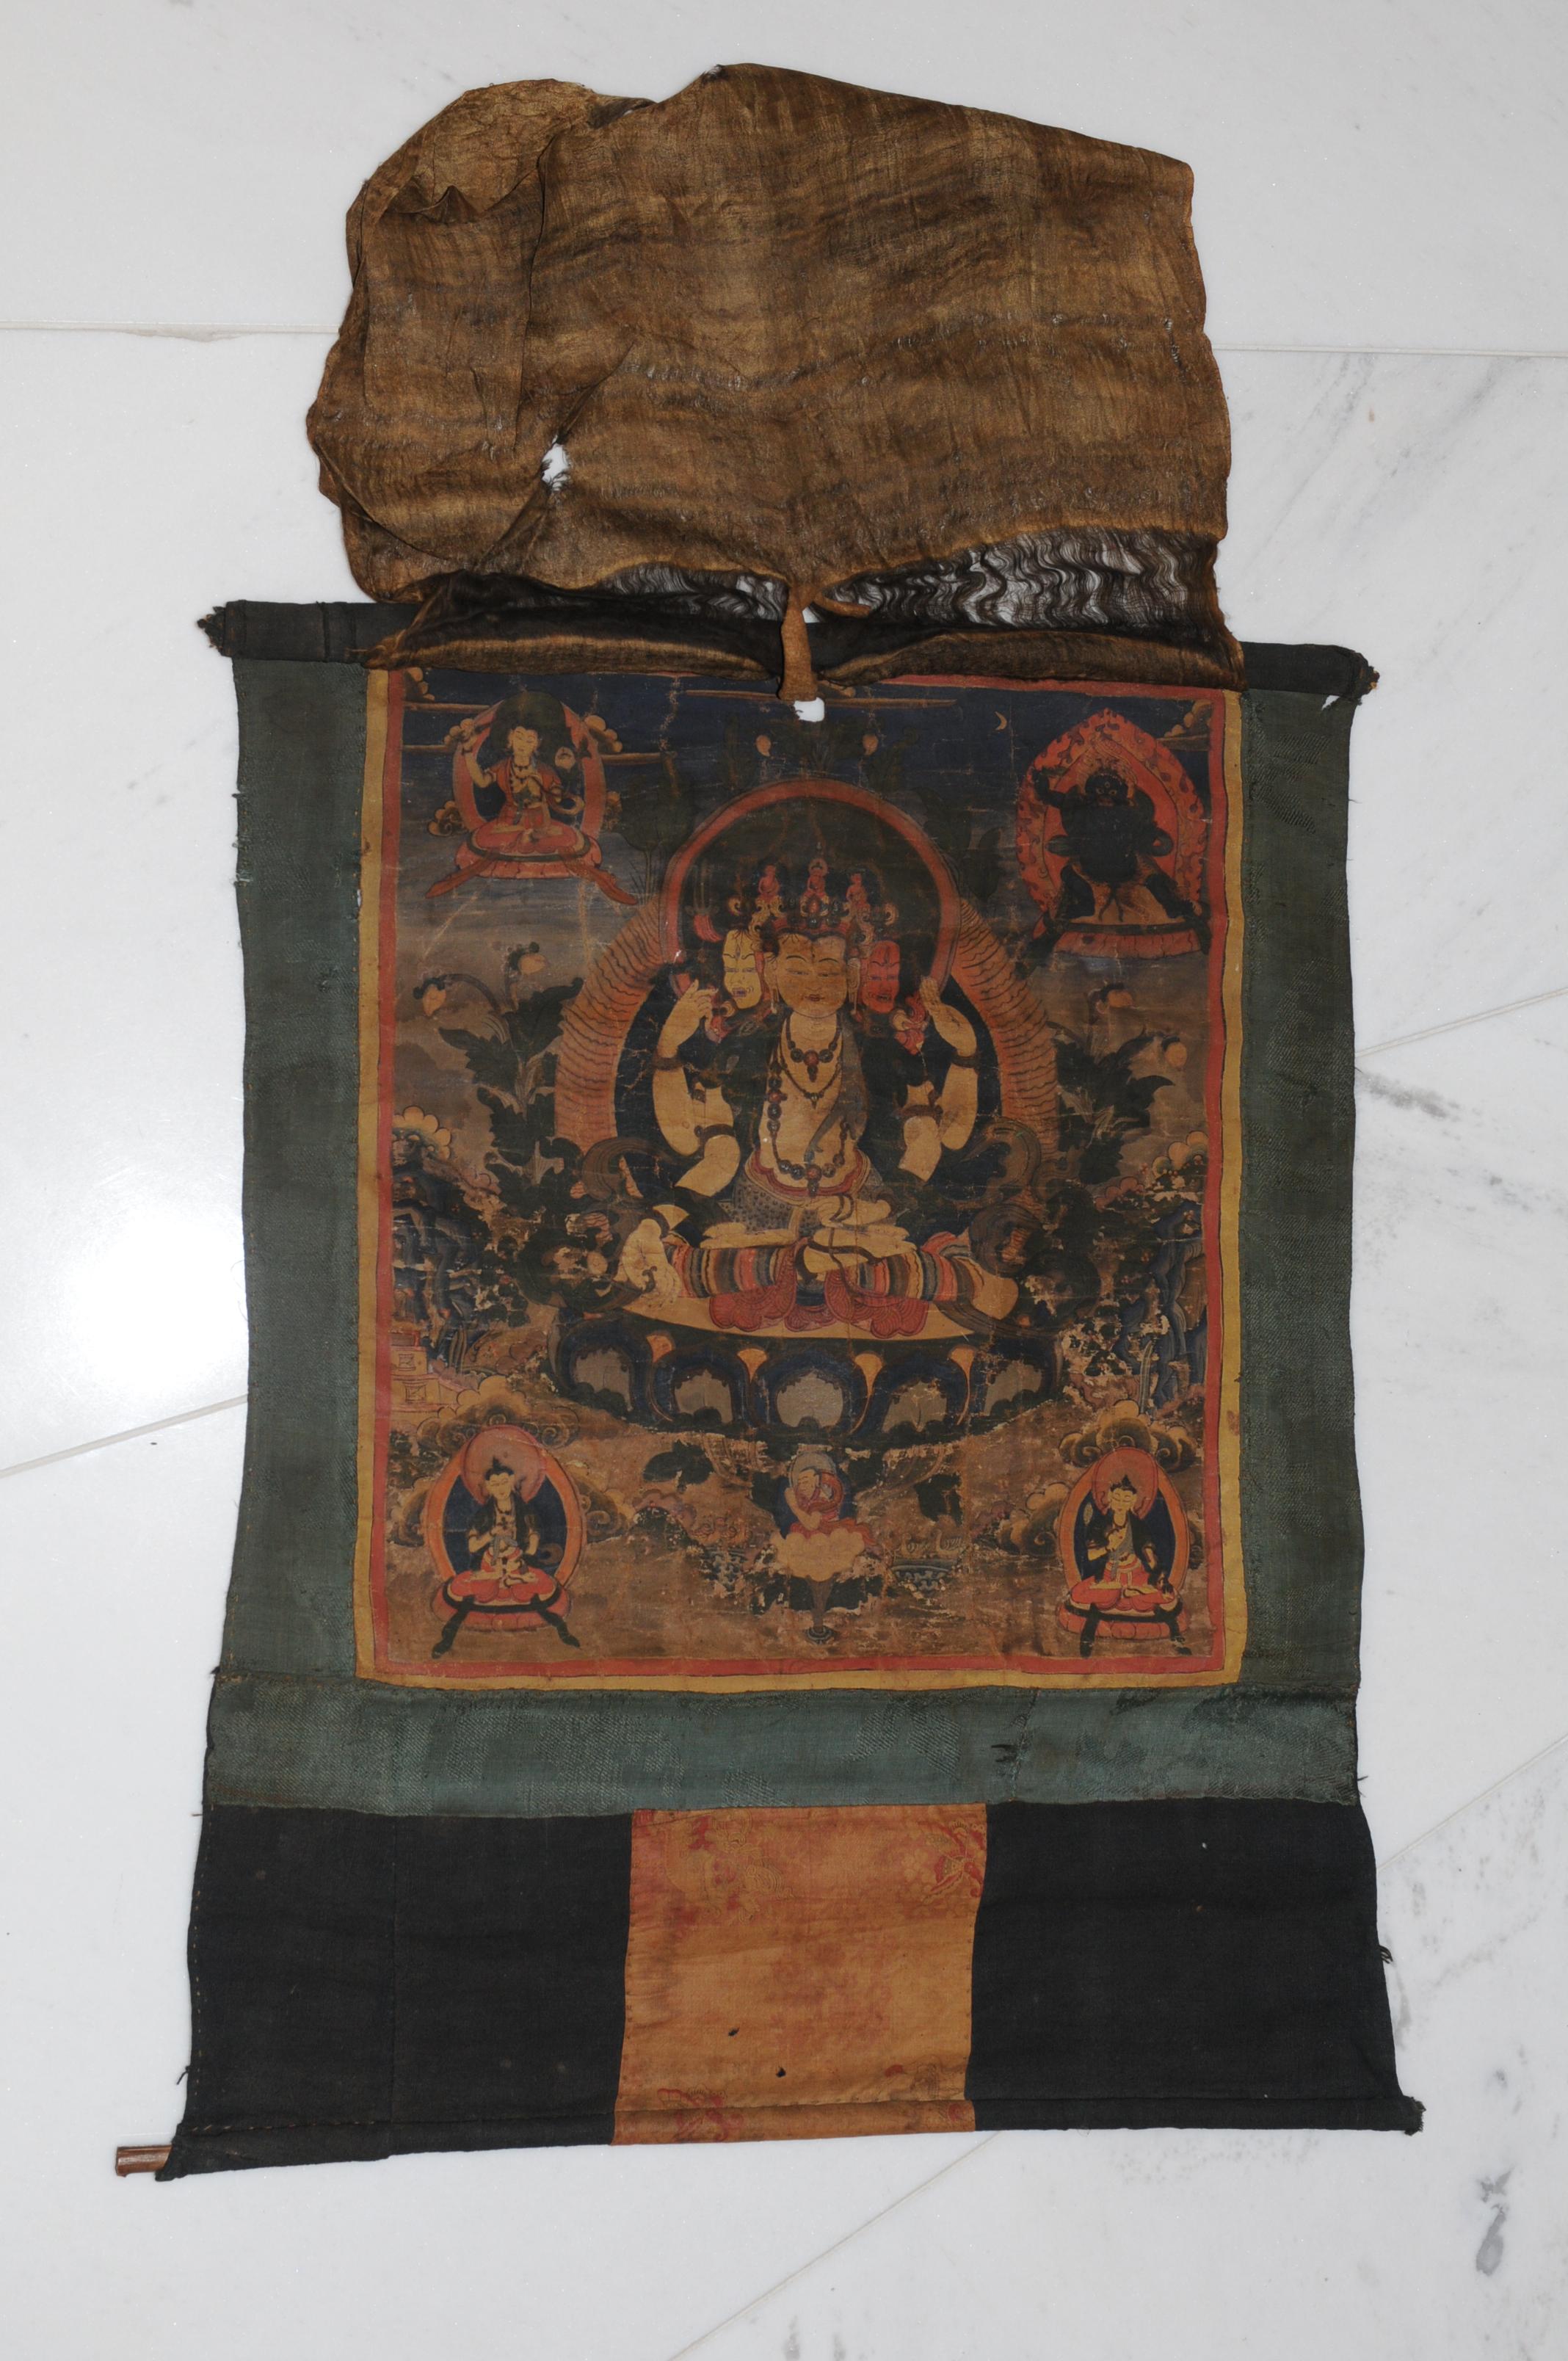 Wonderful antique Tibetan Thangka
End of 18th century
extremely fine work and beautiful old colors
Size net ca. 33 x 38 cm (max. ca. 50 x 60 cm)

has been checked by an expert of the auctionhouse 'Dorotheum' in Vienna
